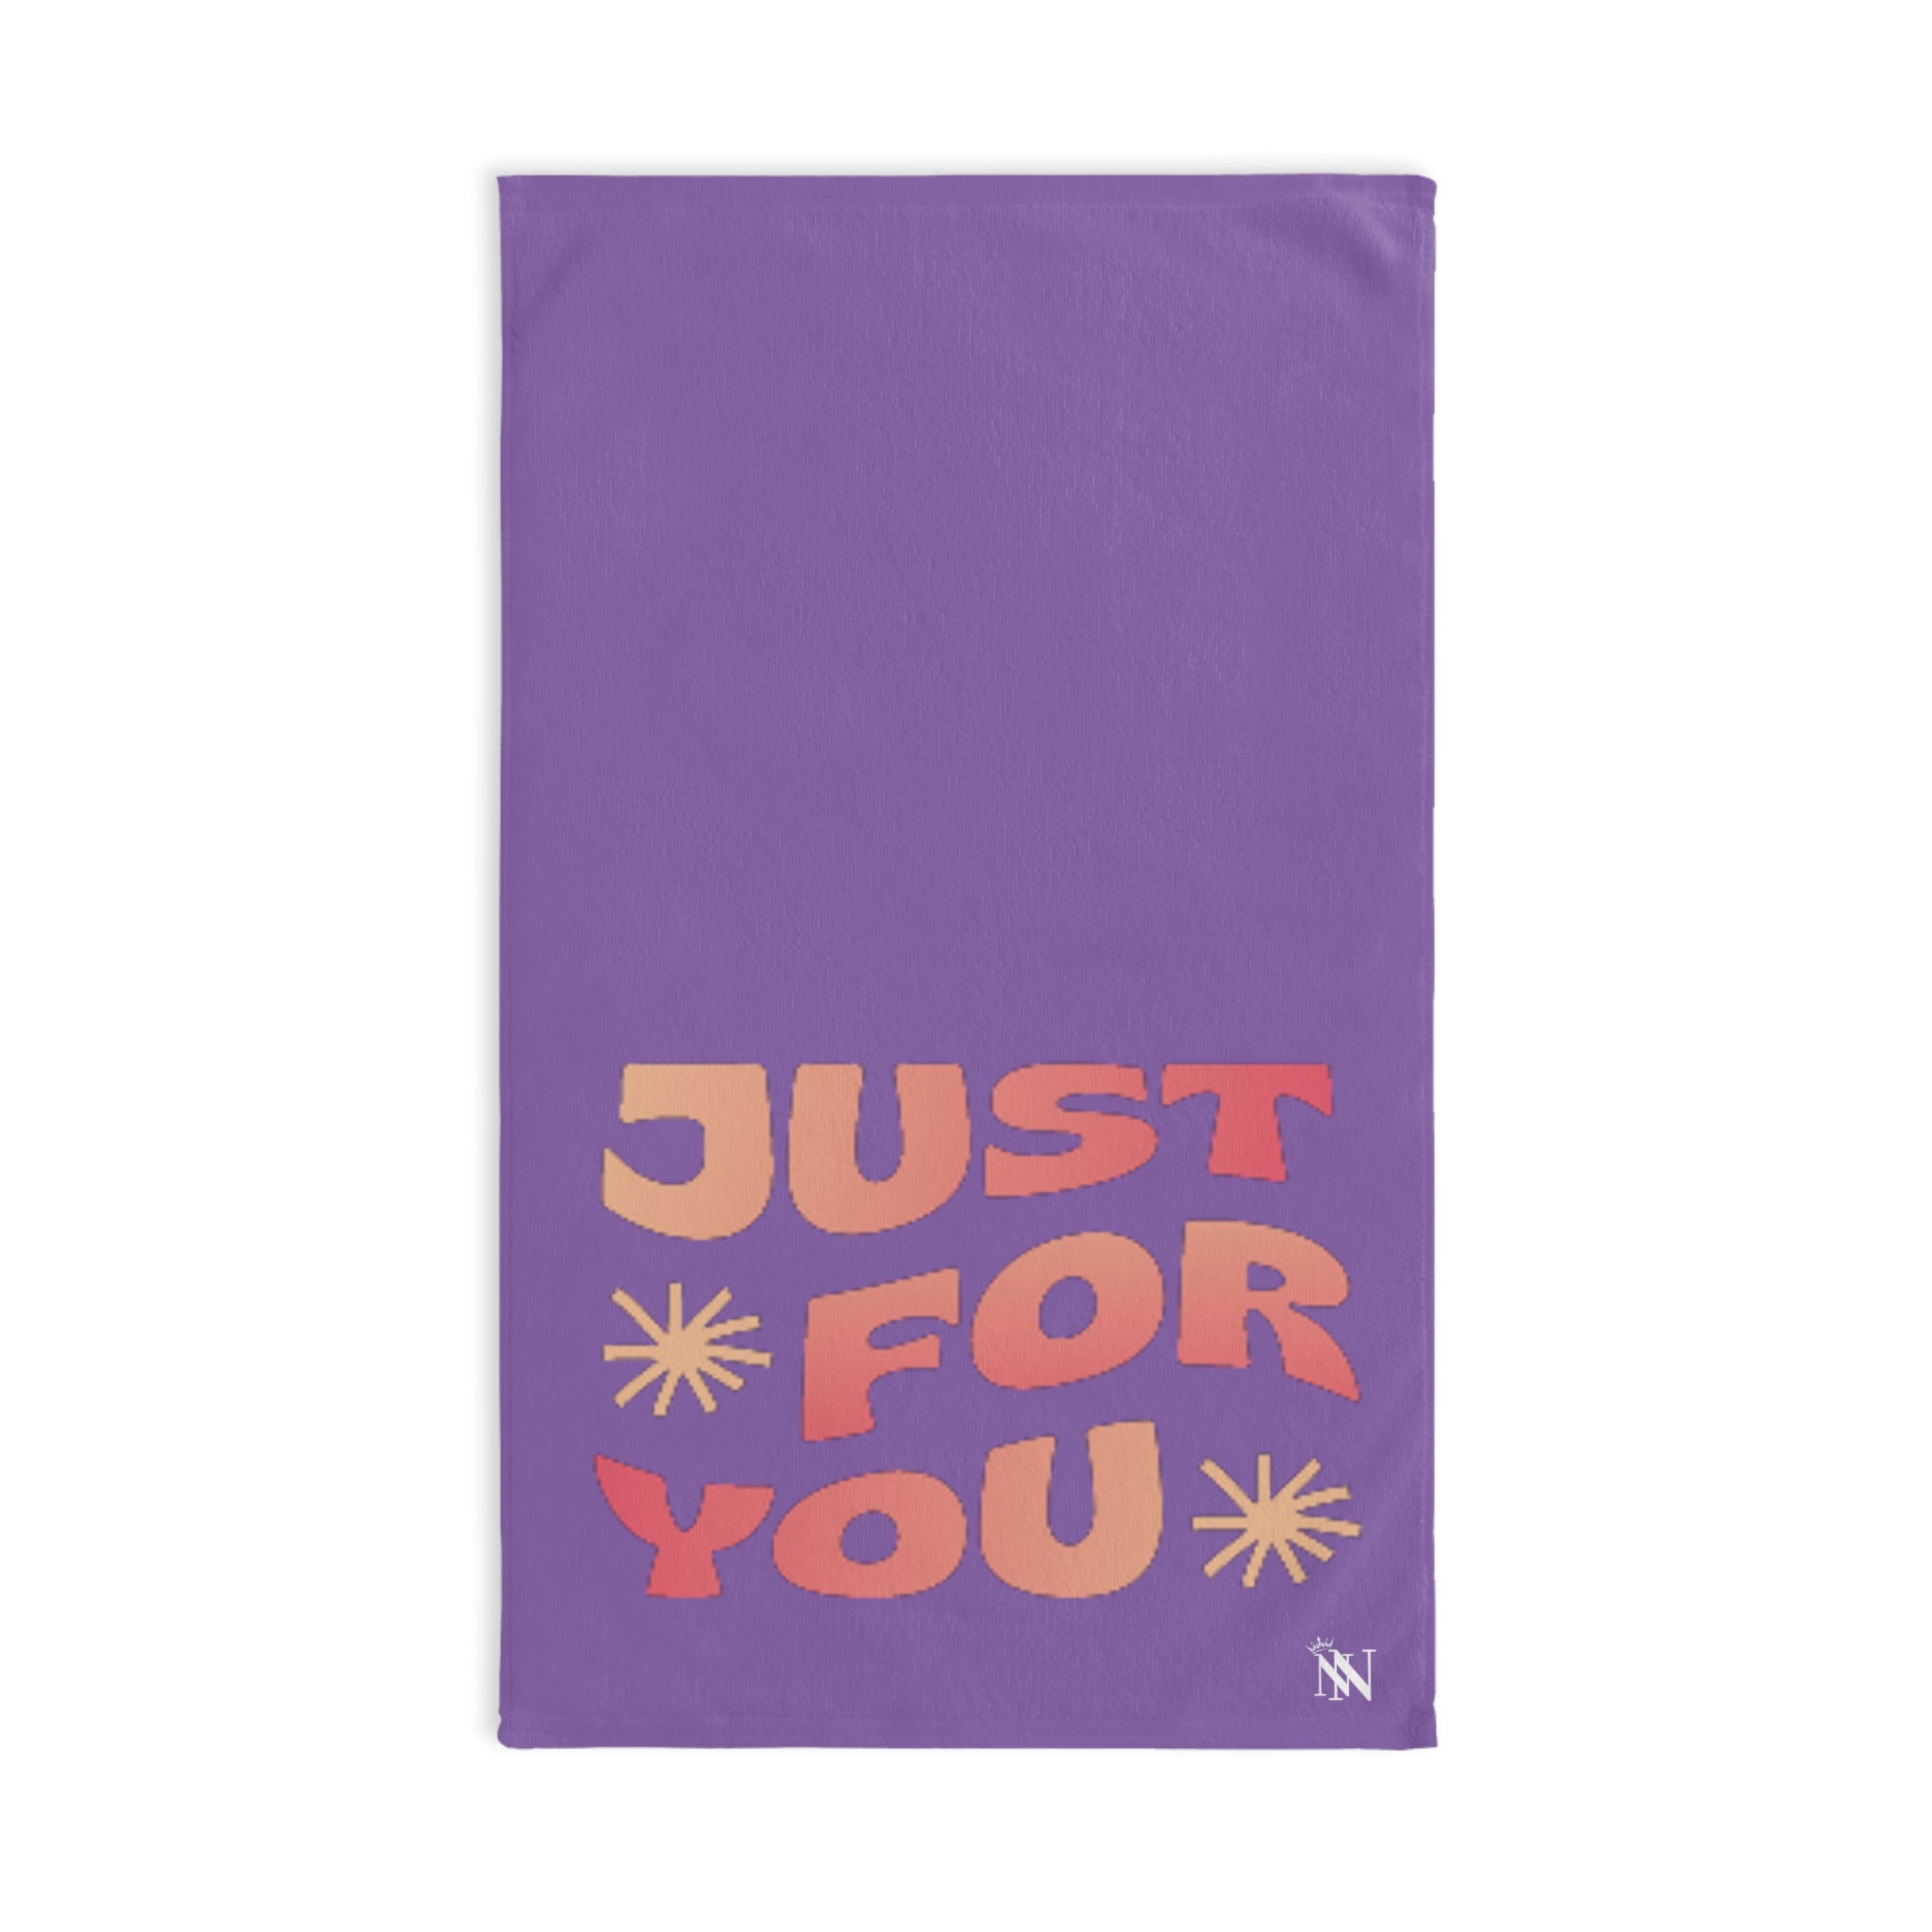 Just For You Lavendar | Funny Gifts for Men - Gifts for Him - Birthday Gifts for Men, Him, Husband, Boyfriend, New Couple Gifts, Fathers & Valentines Day Gifts, Hand Towels NECTAR NAPKINS